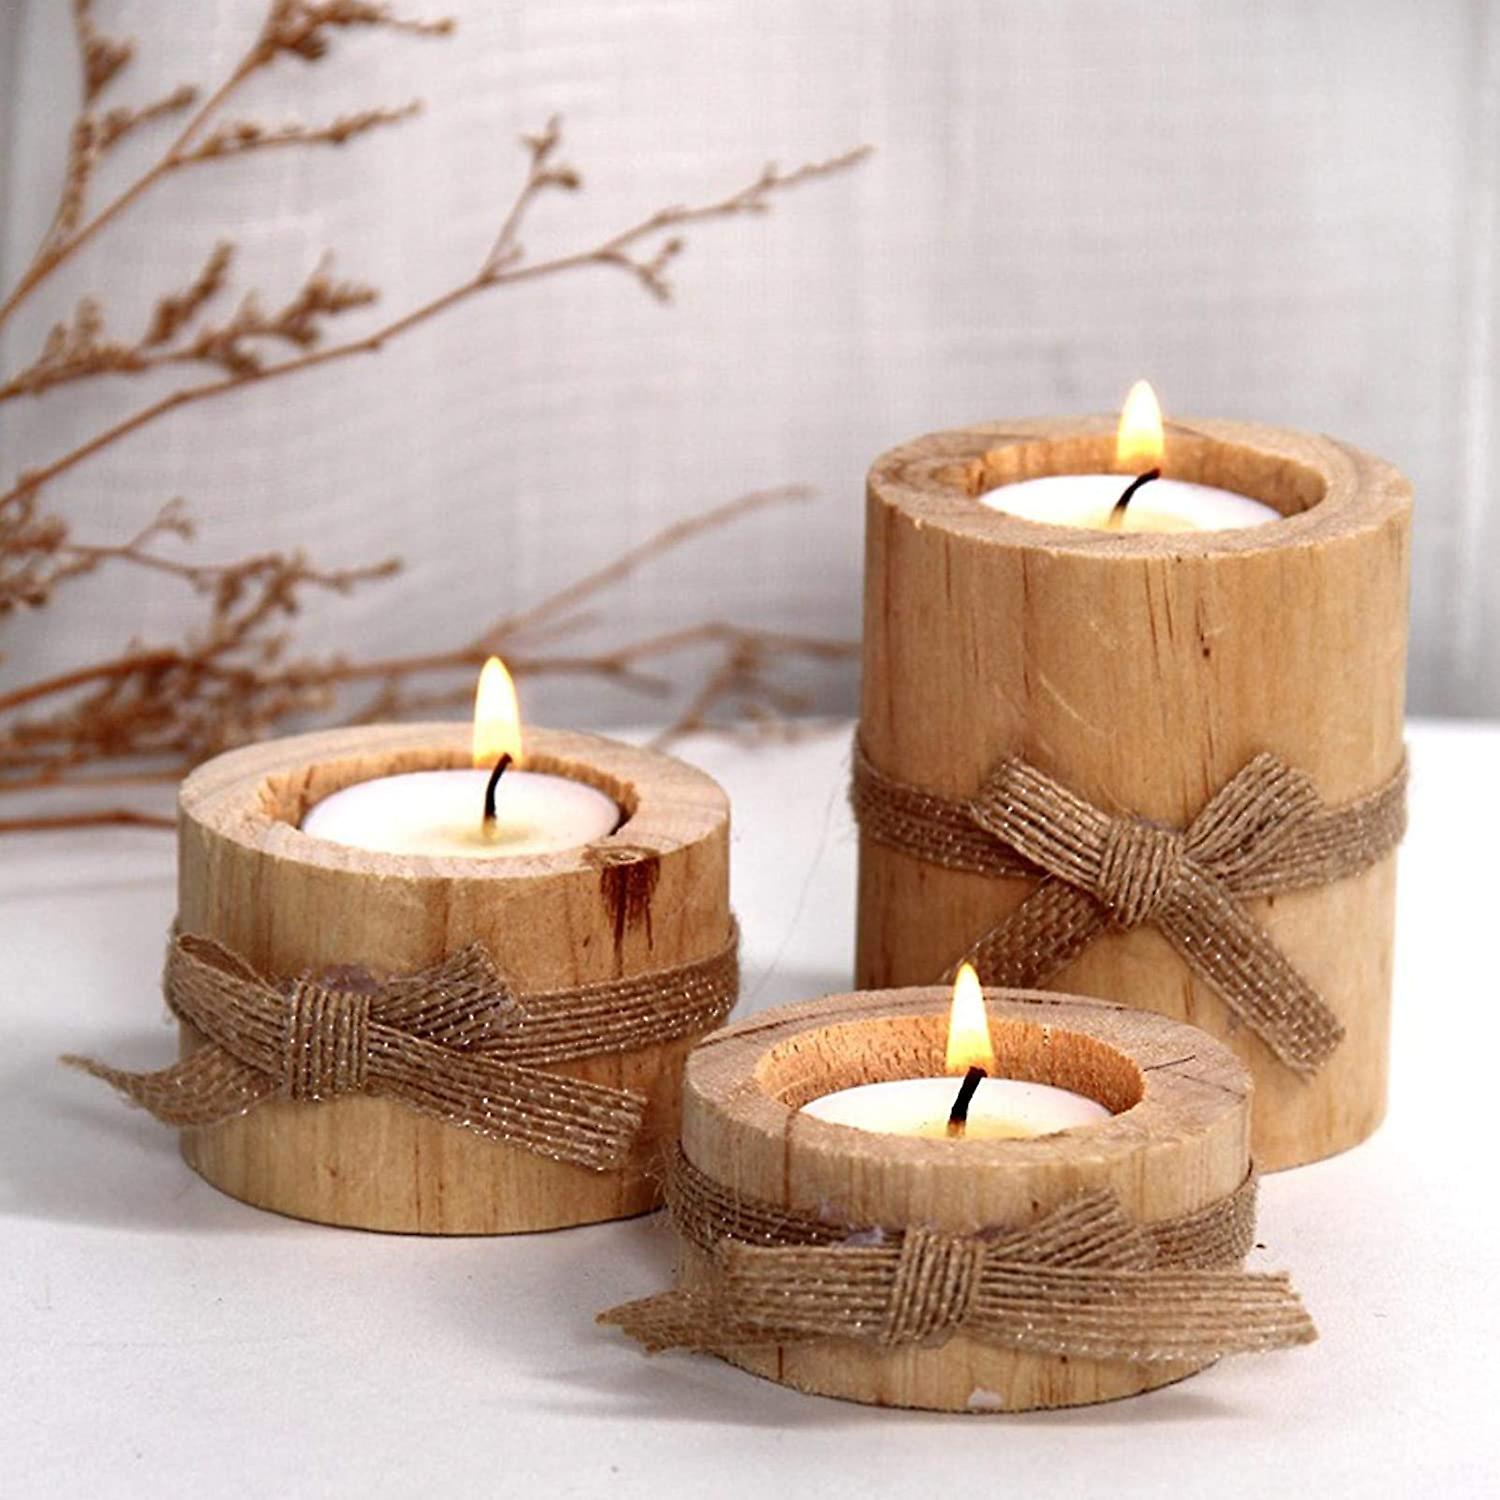 Wooden Candle Holders, Wood Candle Holders, Wooden Candle Holders